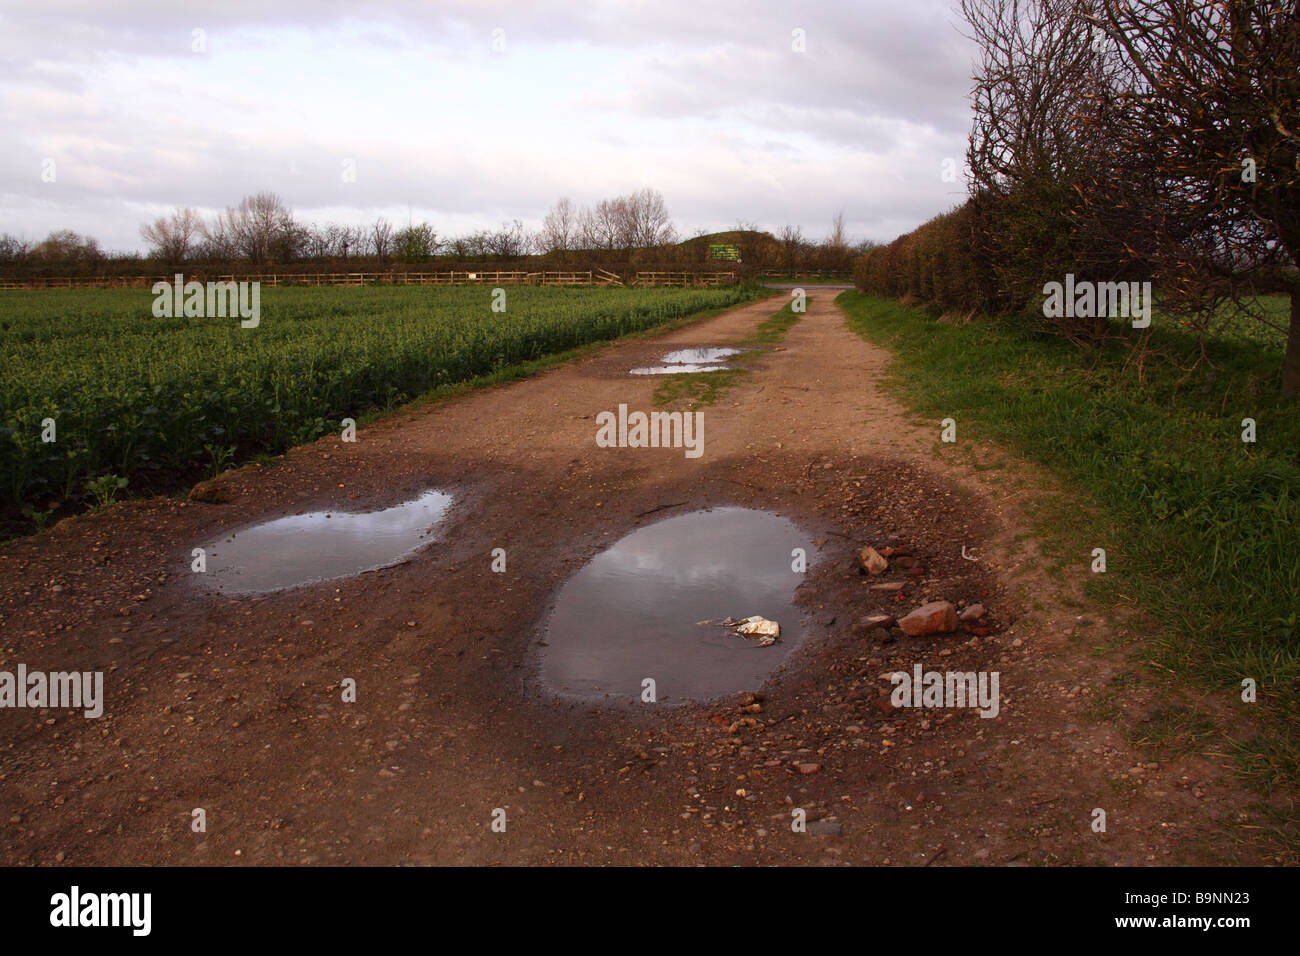 Farm track with ruts and puddles full of water Stock Photo